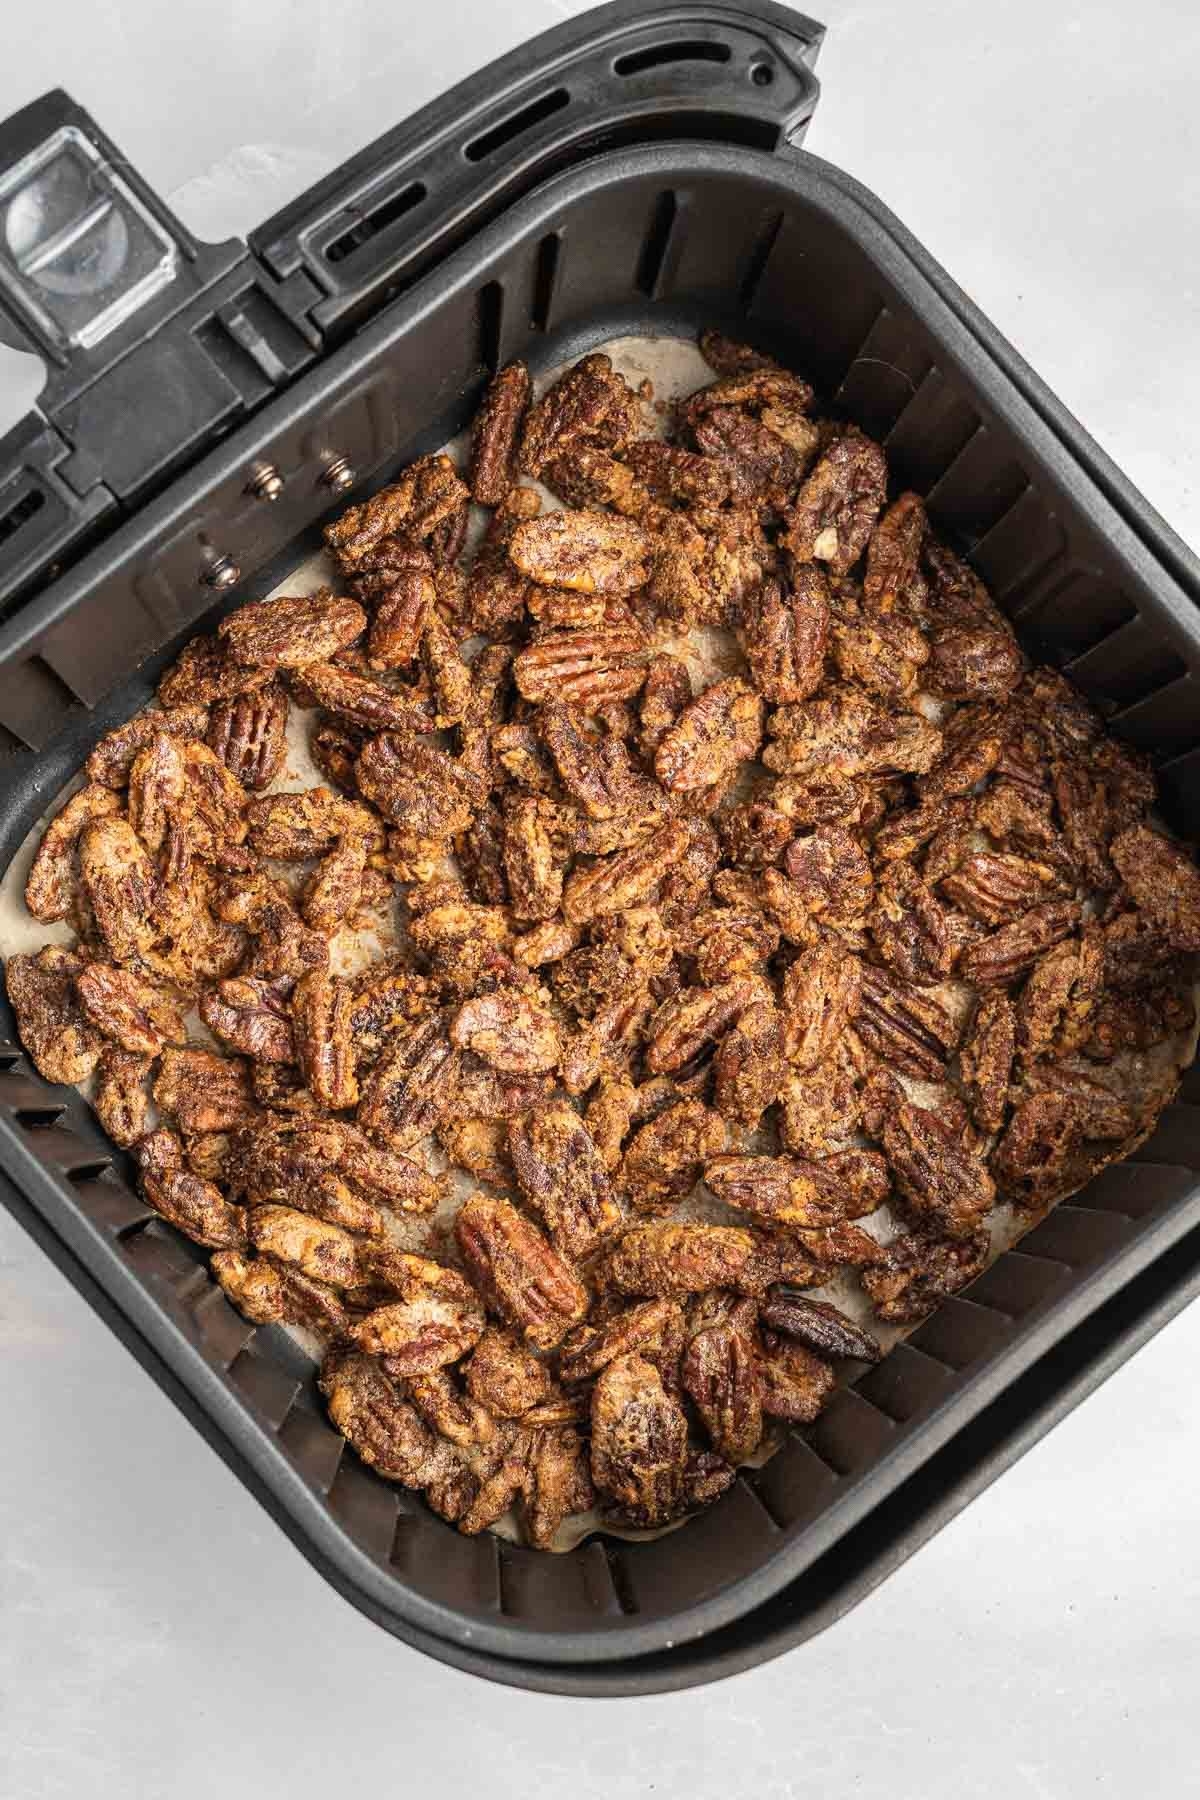 Candied pecans in the air fryer basket